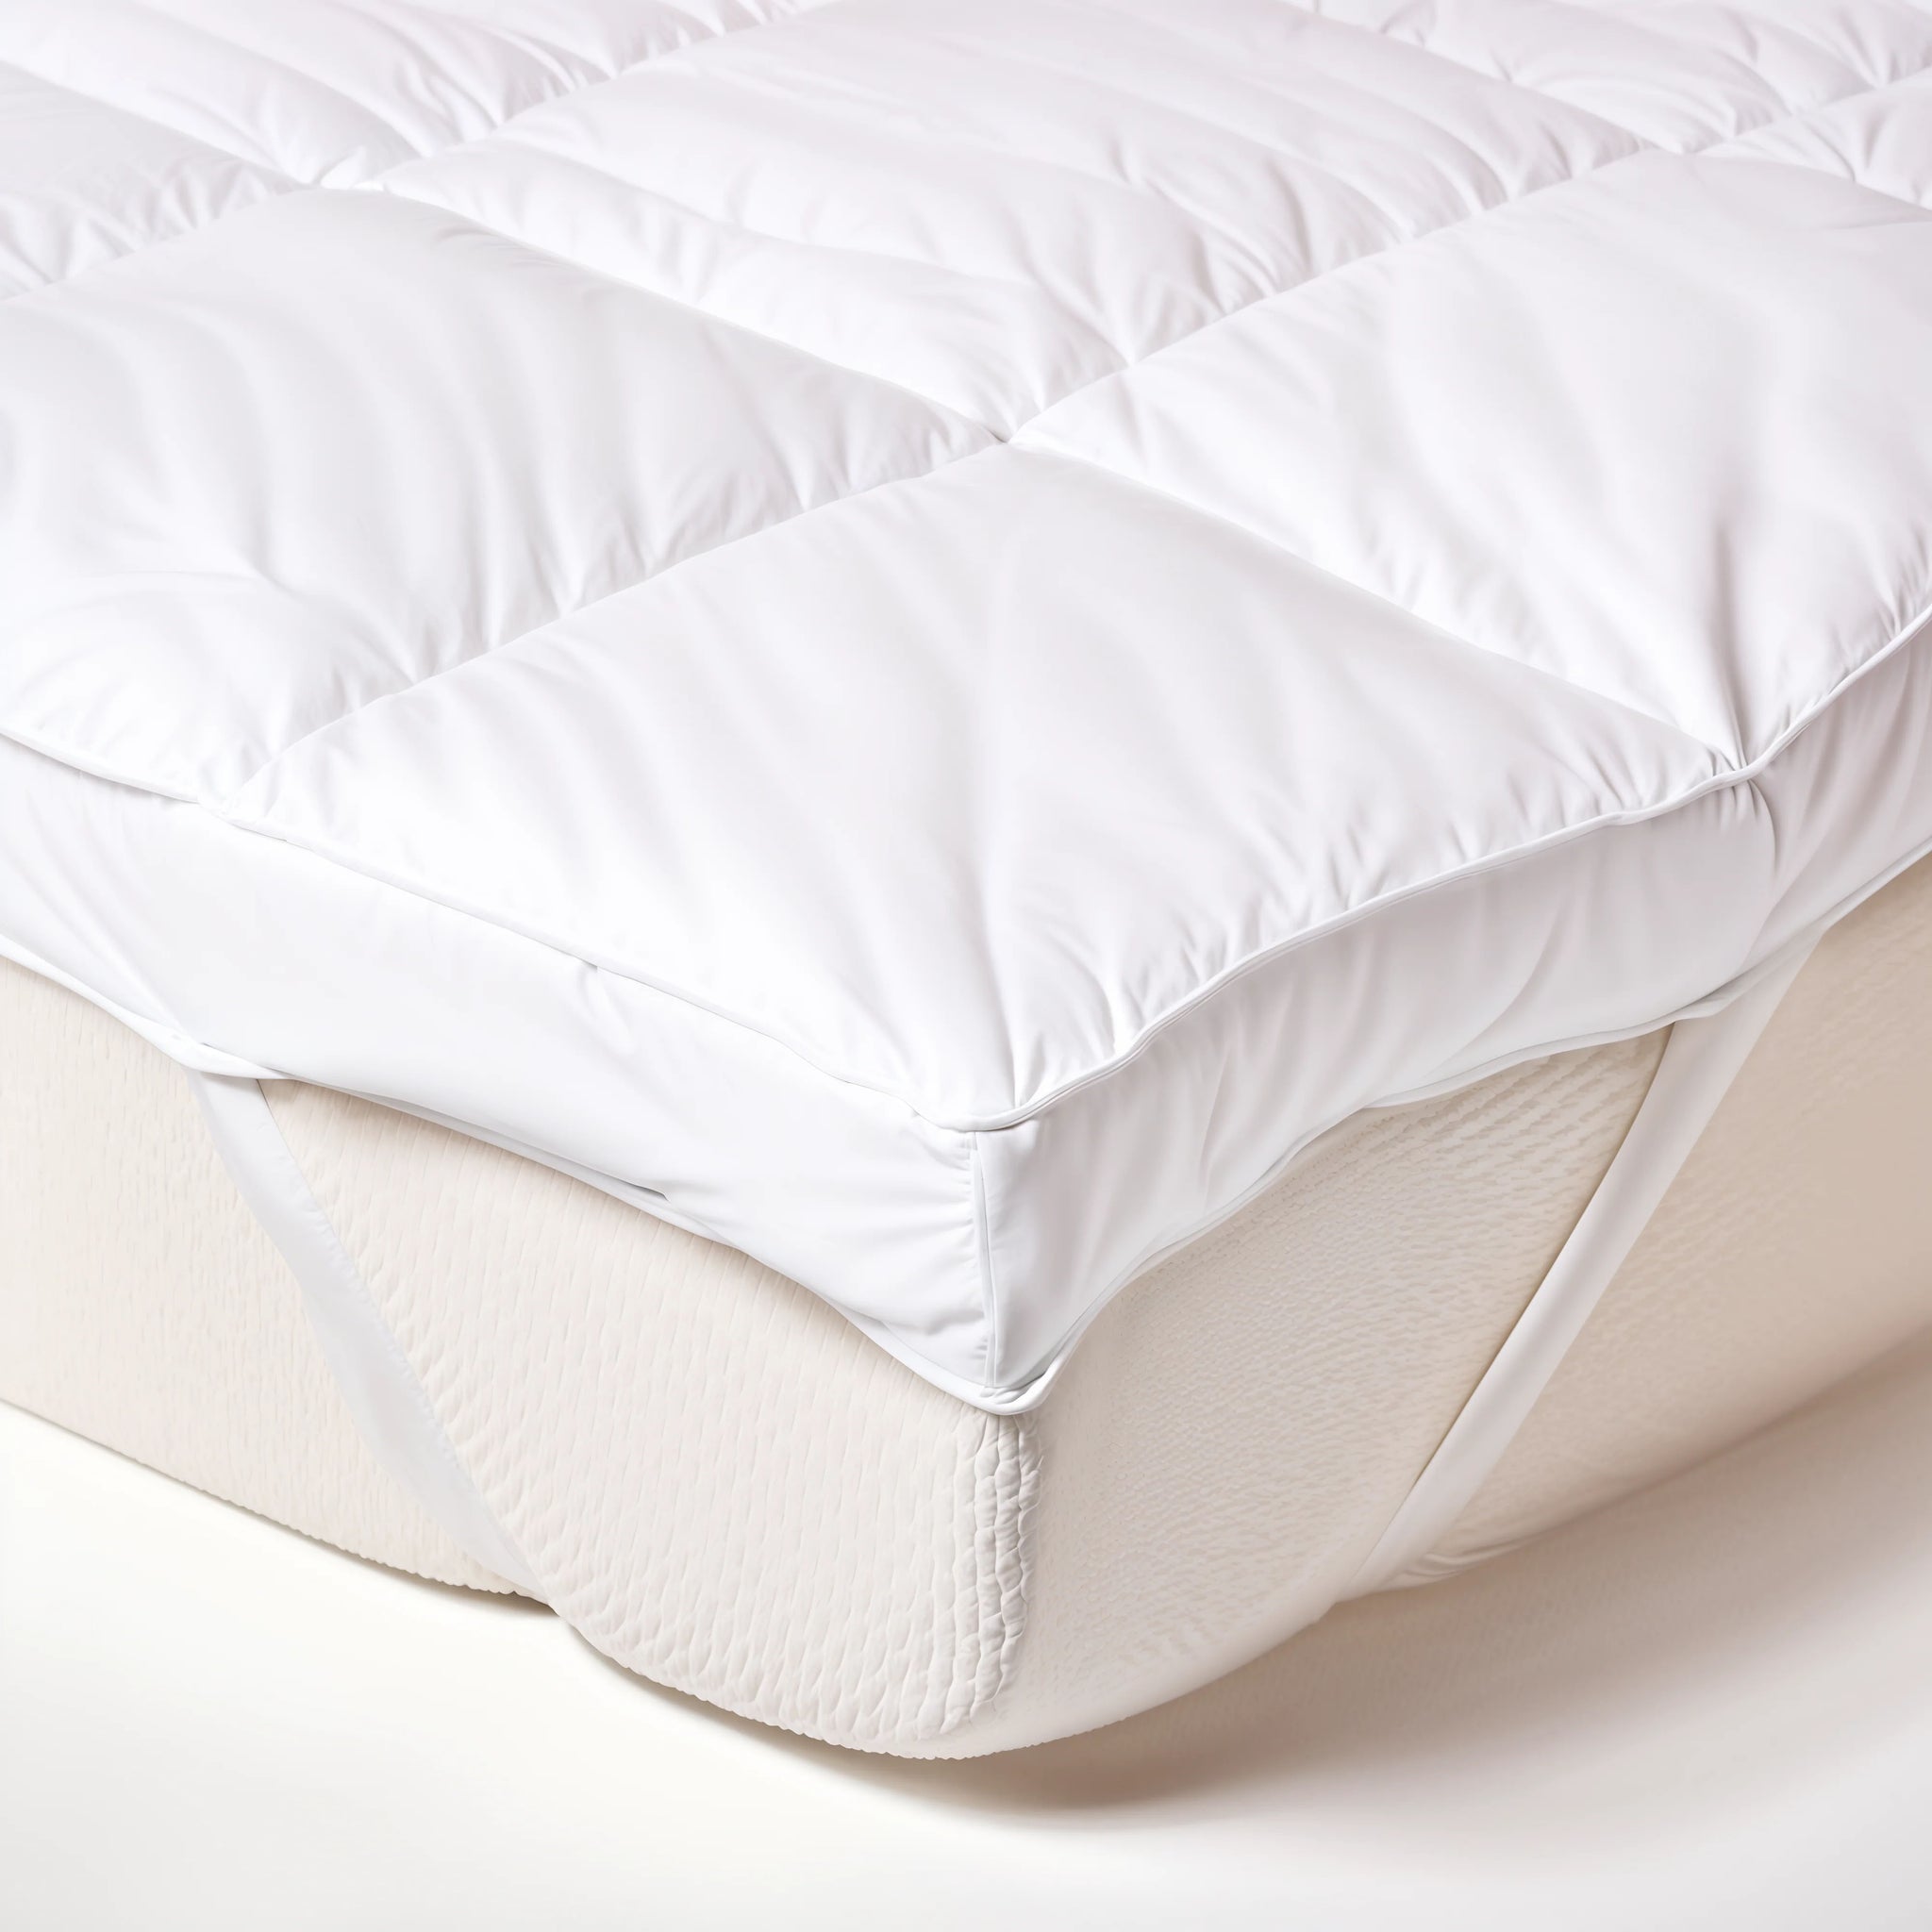 Mattress Cover Topper in 100% Goose Down, Made in Italy - with Elastic Corners